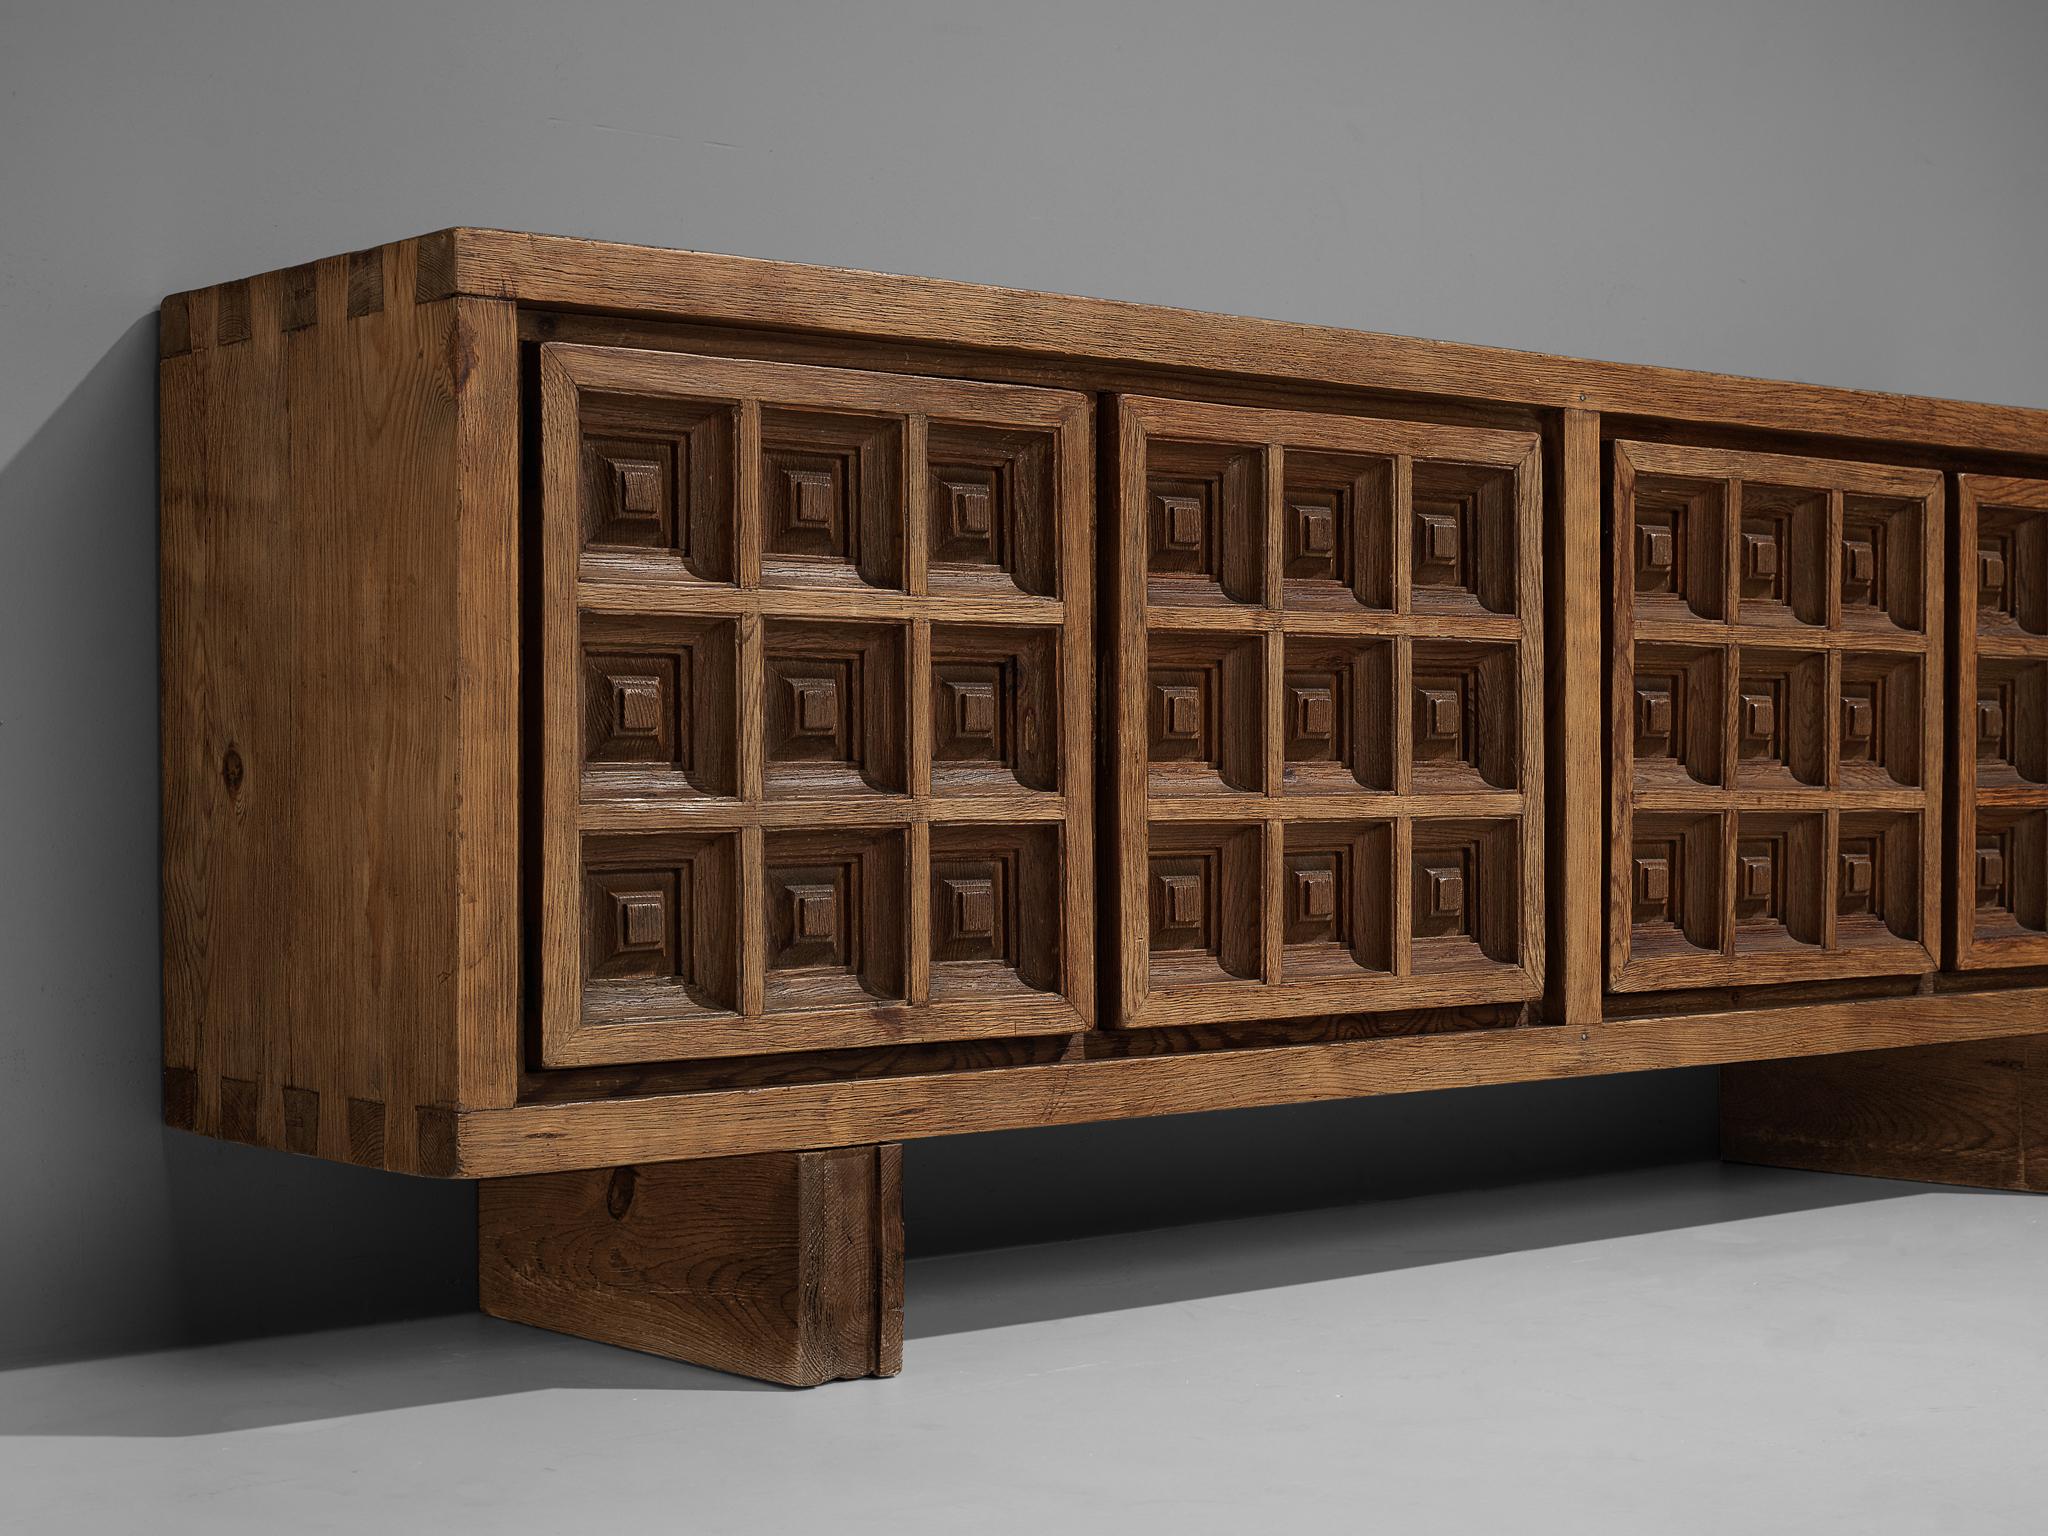 Spanish Sideboard in Stained Pine Manufactured by Biosca 1